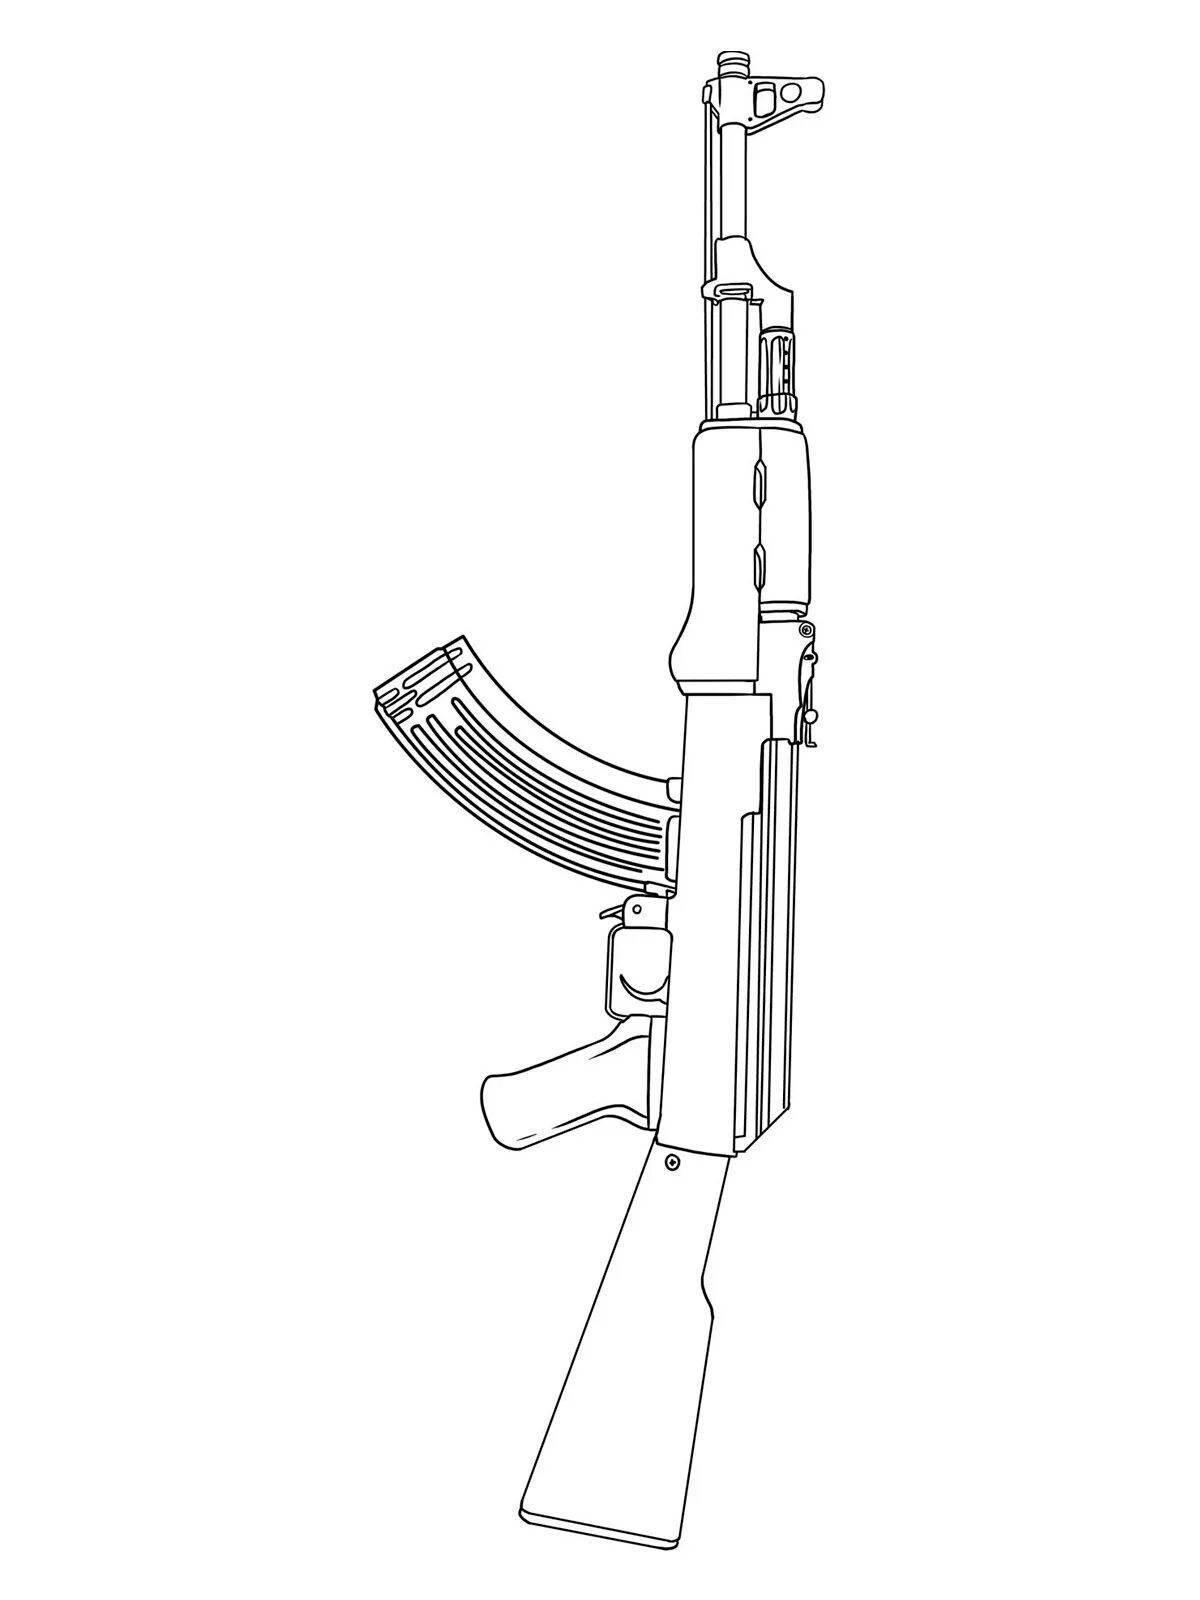 Radiant standoff 2 weapon coloring page